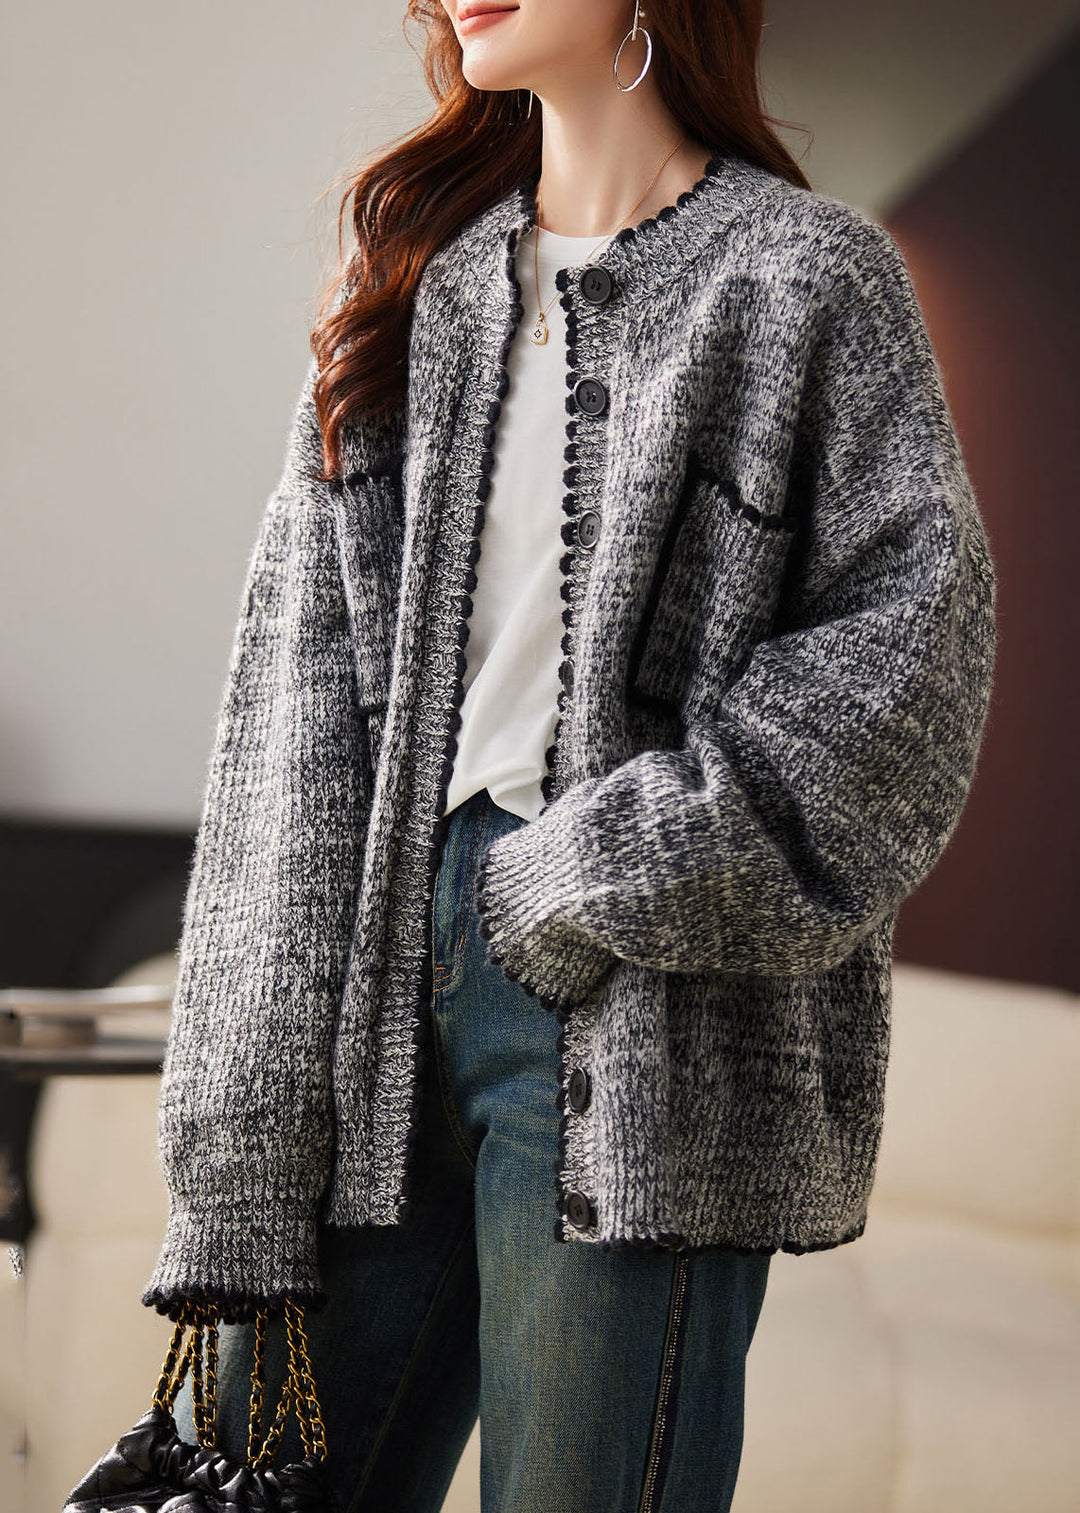 Casual Grey O-Neck Patchwork Button Cotton Knit Cardigans Fall